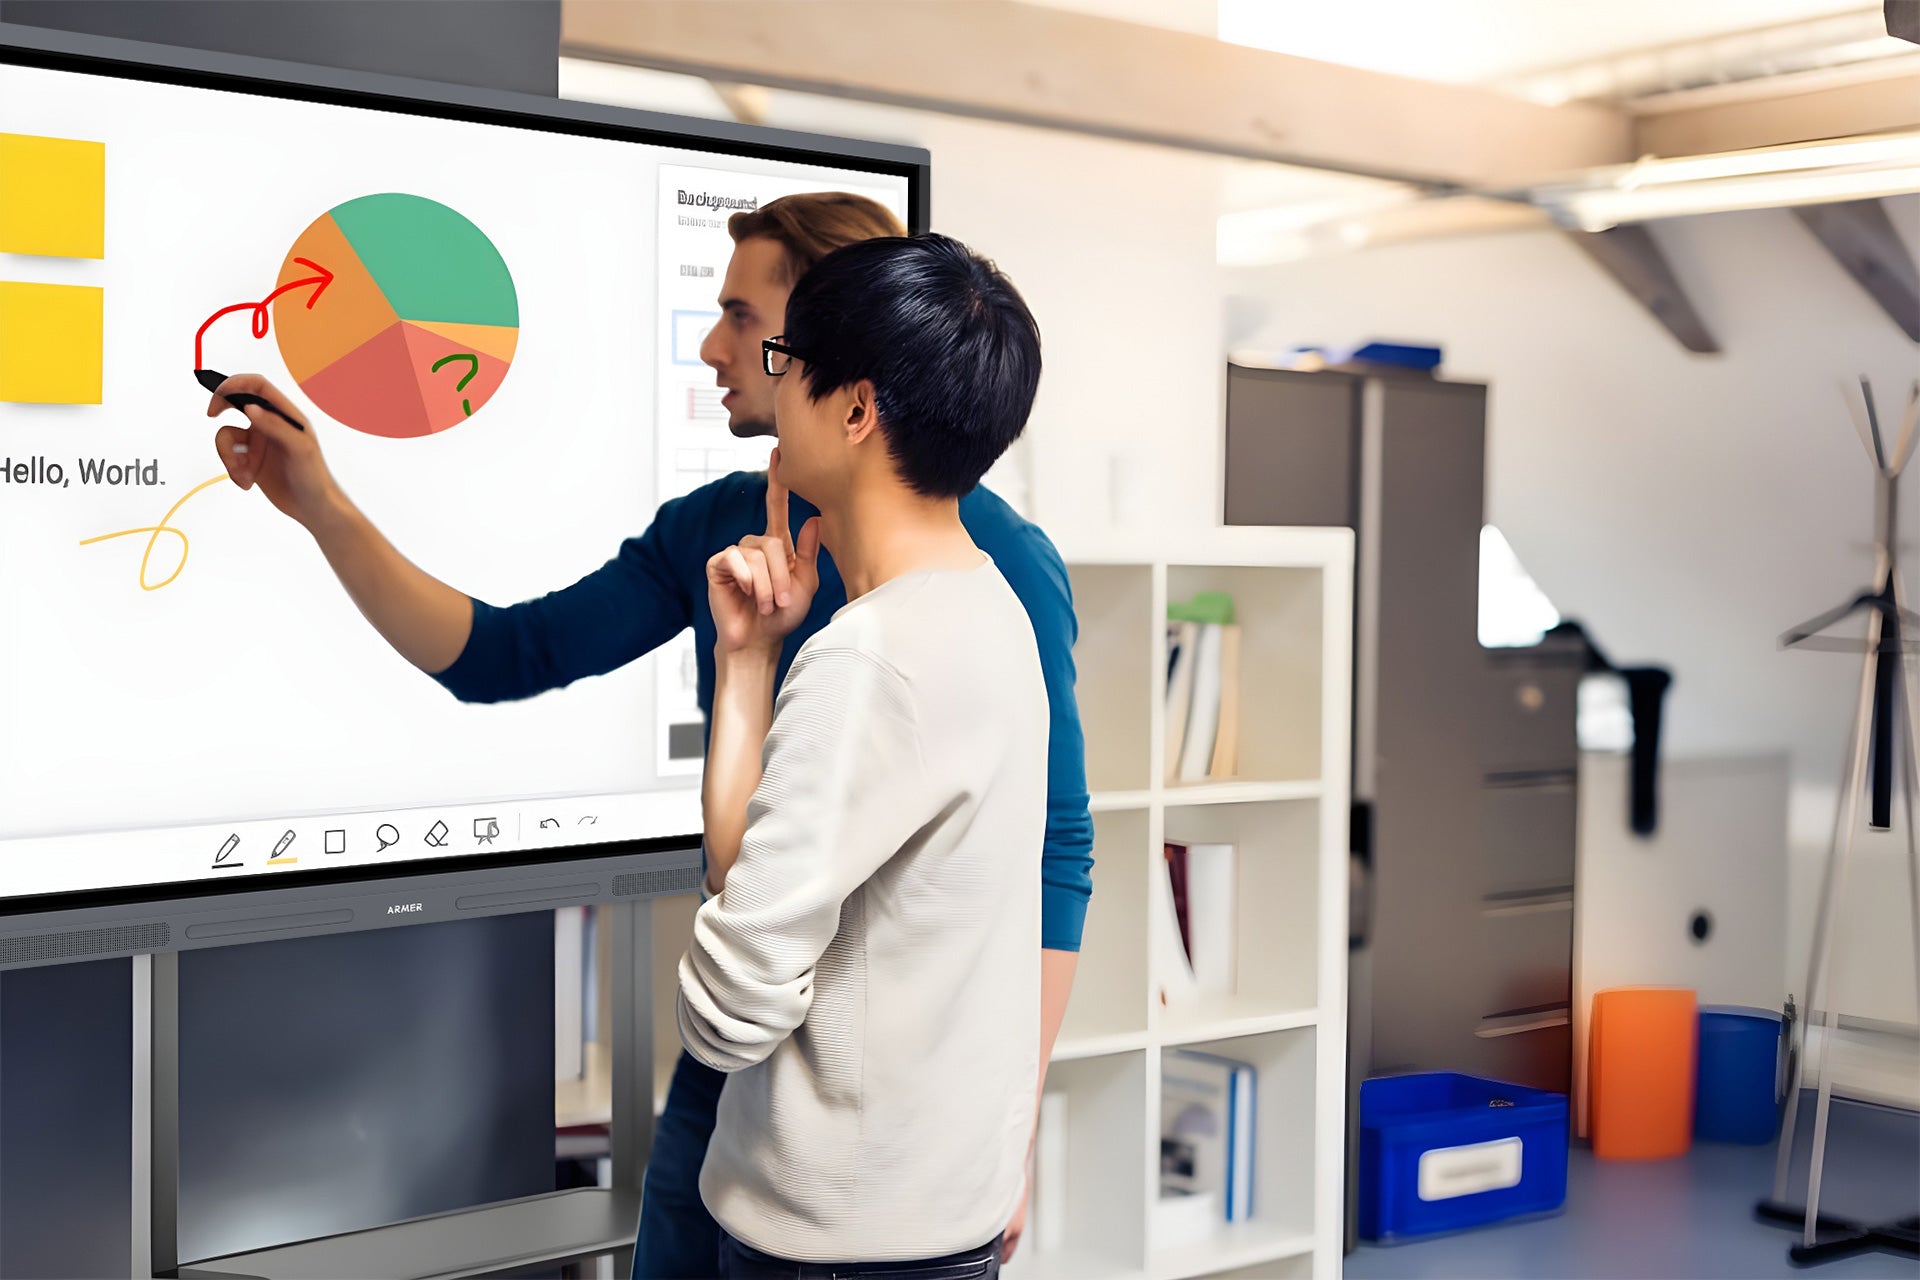 Armer smart whiteboard transformed our office meetings | How About Armer